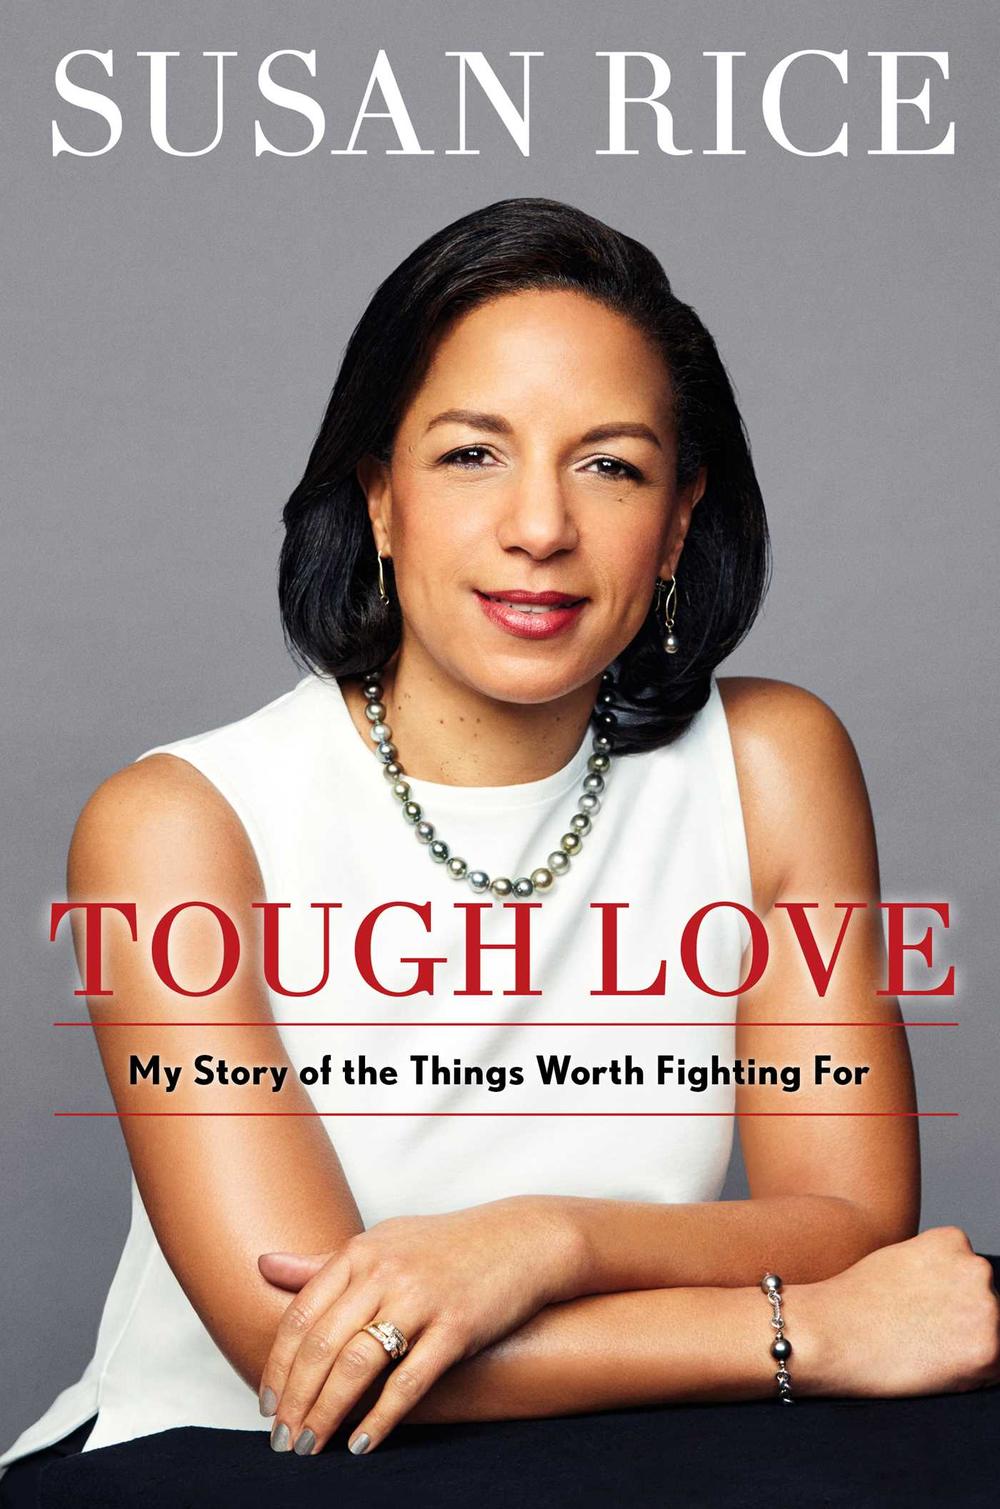 Ambassador Susan Rice released an autobiography earlier this month. It's called "Tough Love: My Story of the Things Worth Fighting For." Rice will be in conversation with Stacey Abrams on Wednesday at Georgia Tech's Ferst Center for the Arts. 